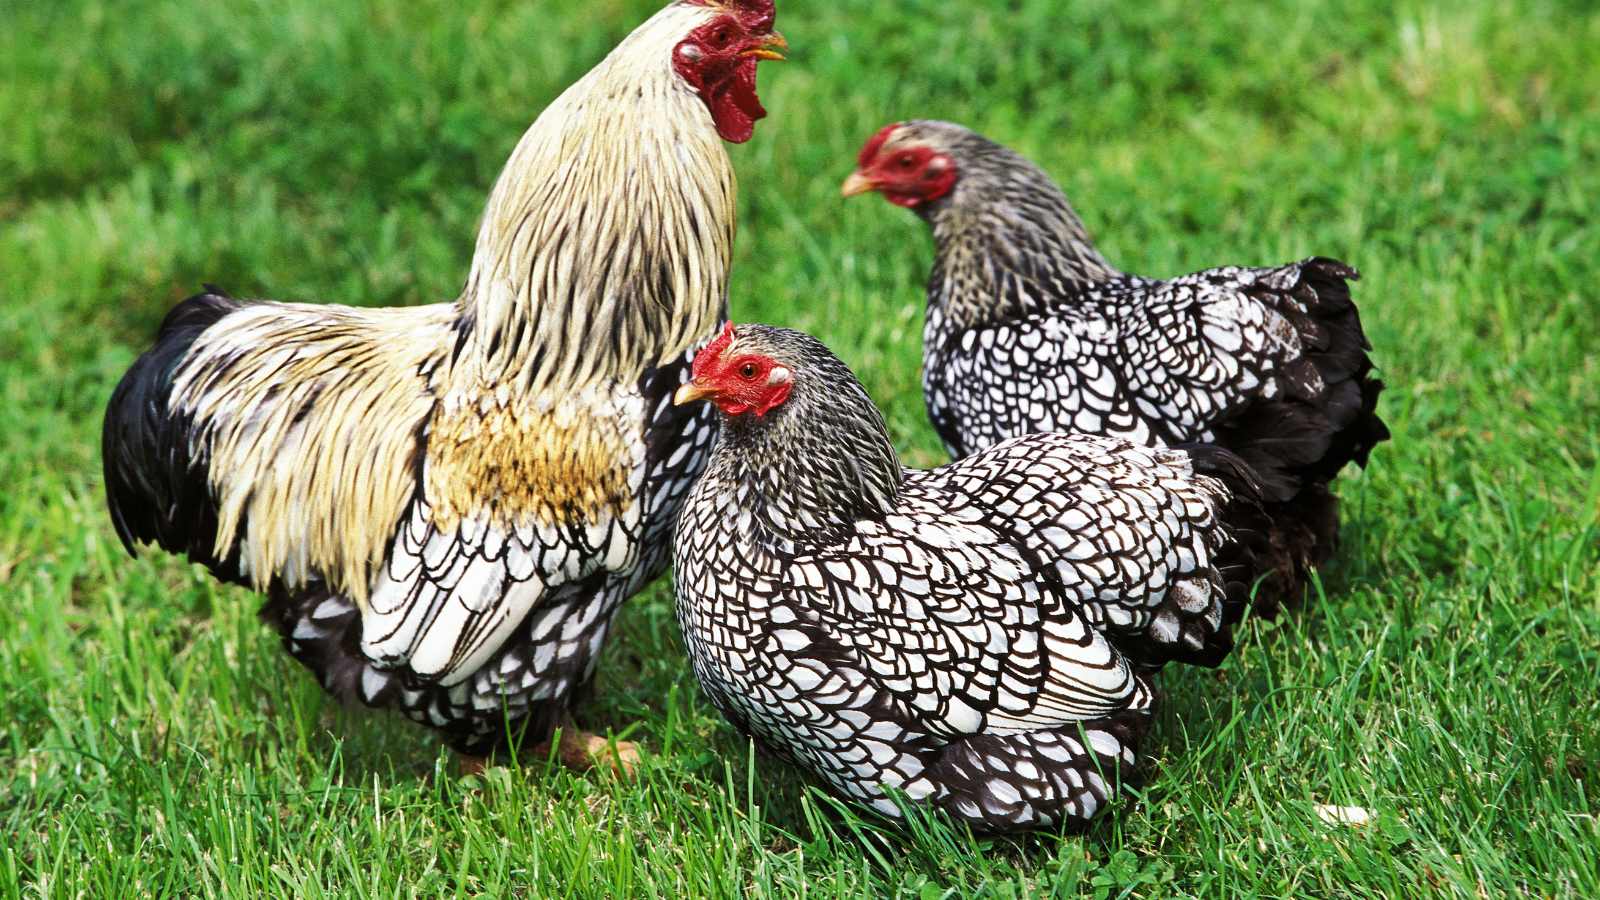 Two white and black laced Wyandotte hens standing in grassy field next to their rooster.